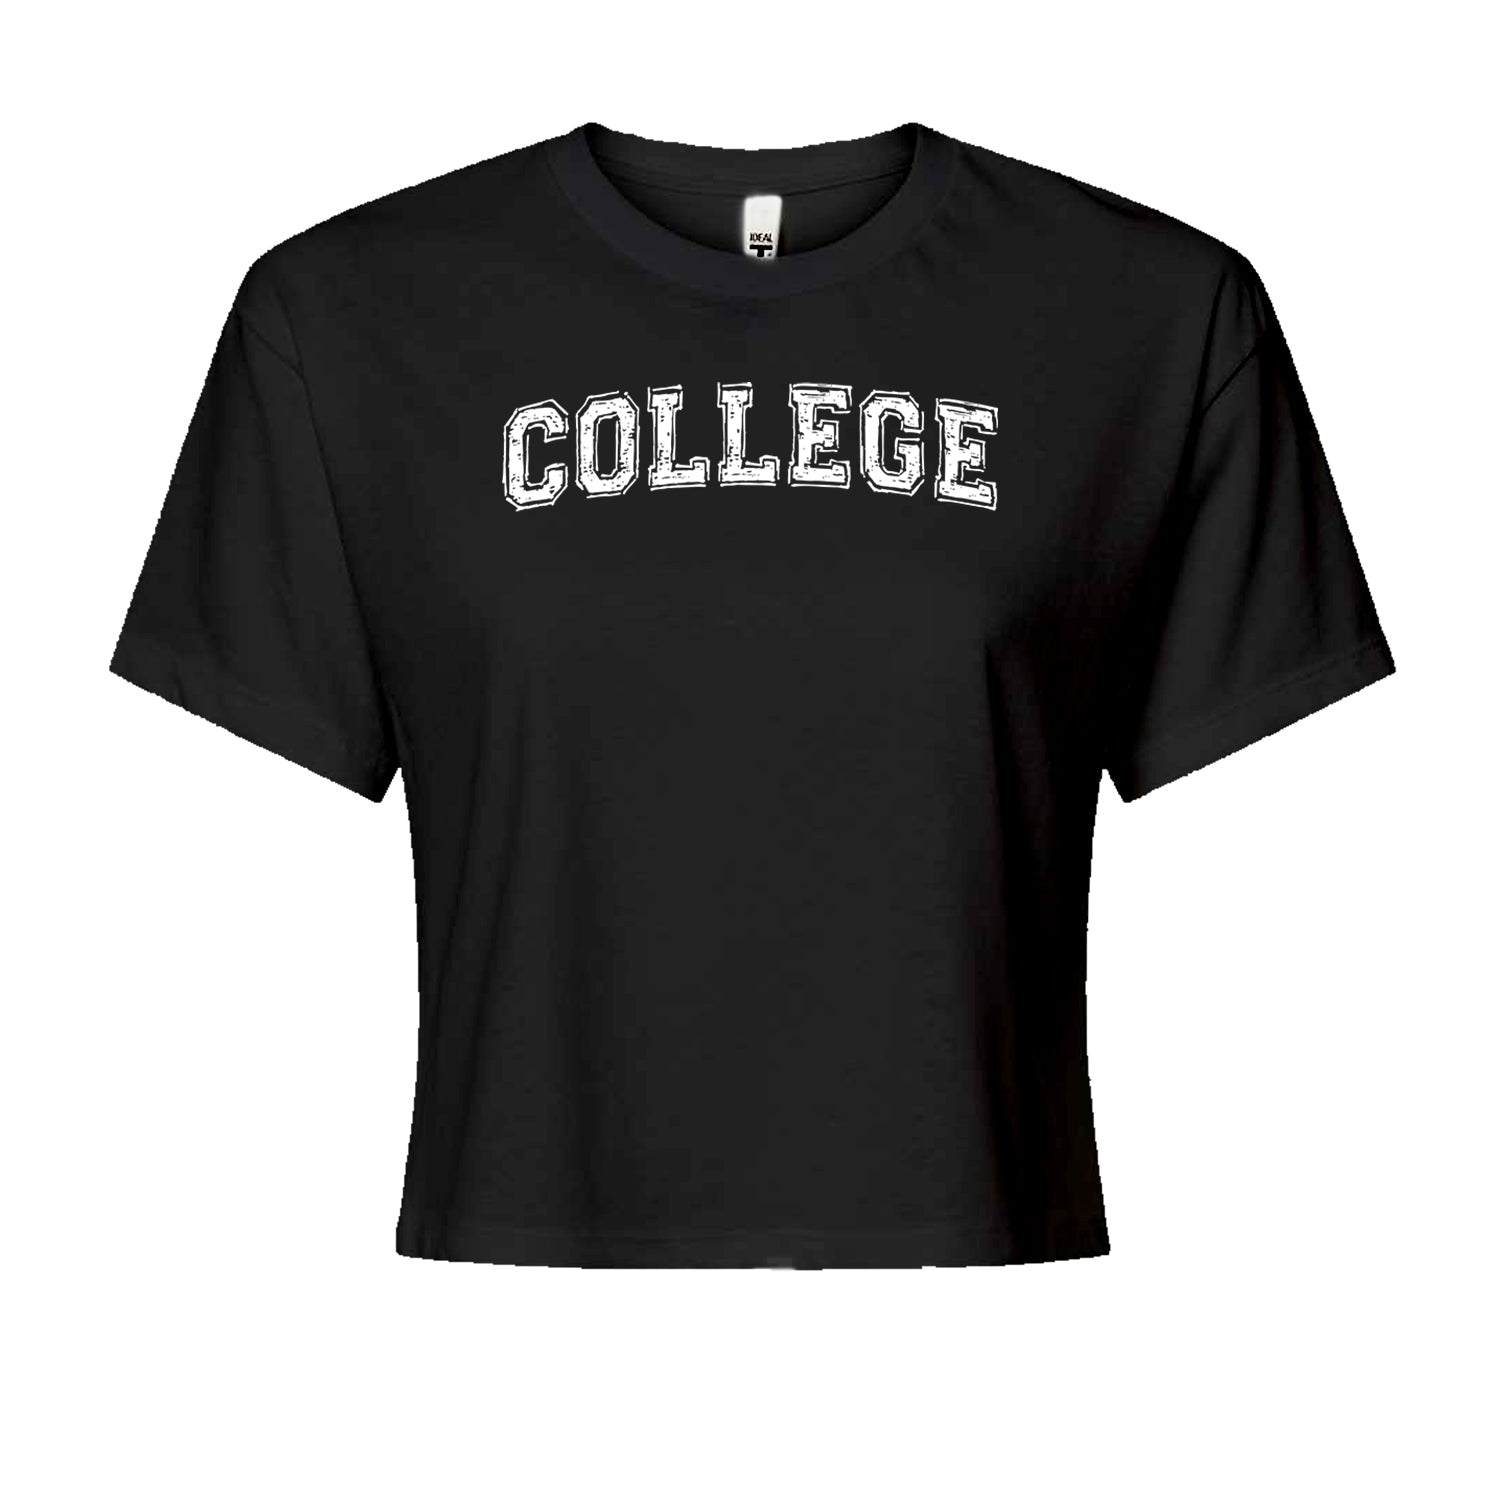 College Belushi Frat House Party Bluto Tribute Animal Cropped T-Shirt